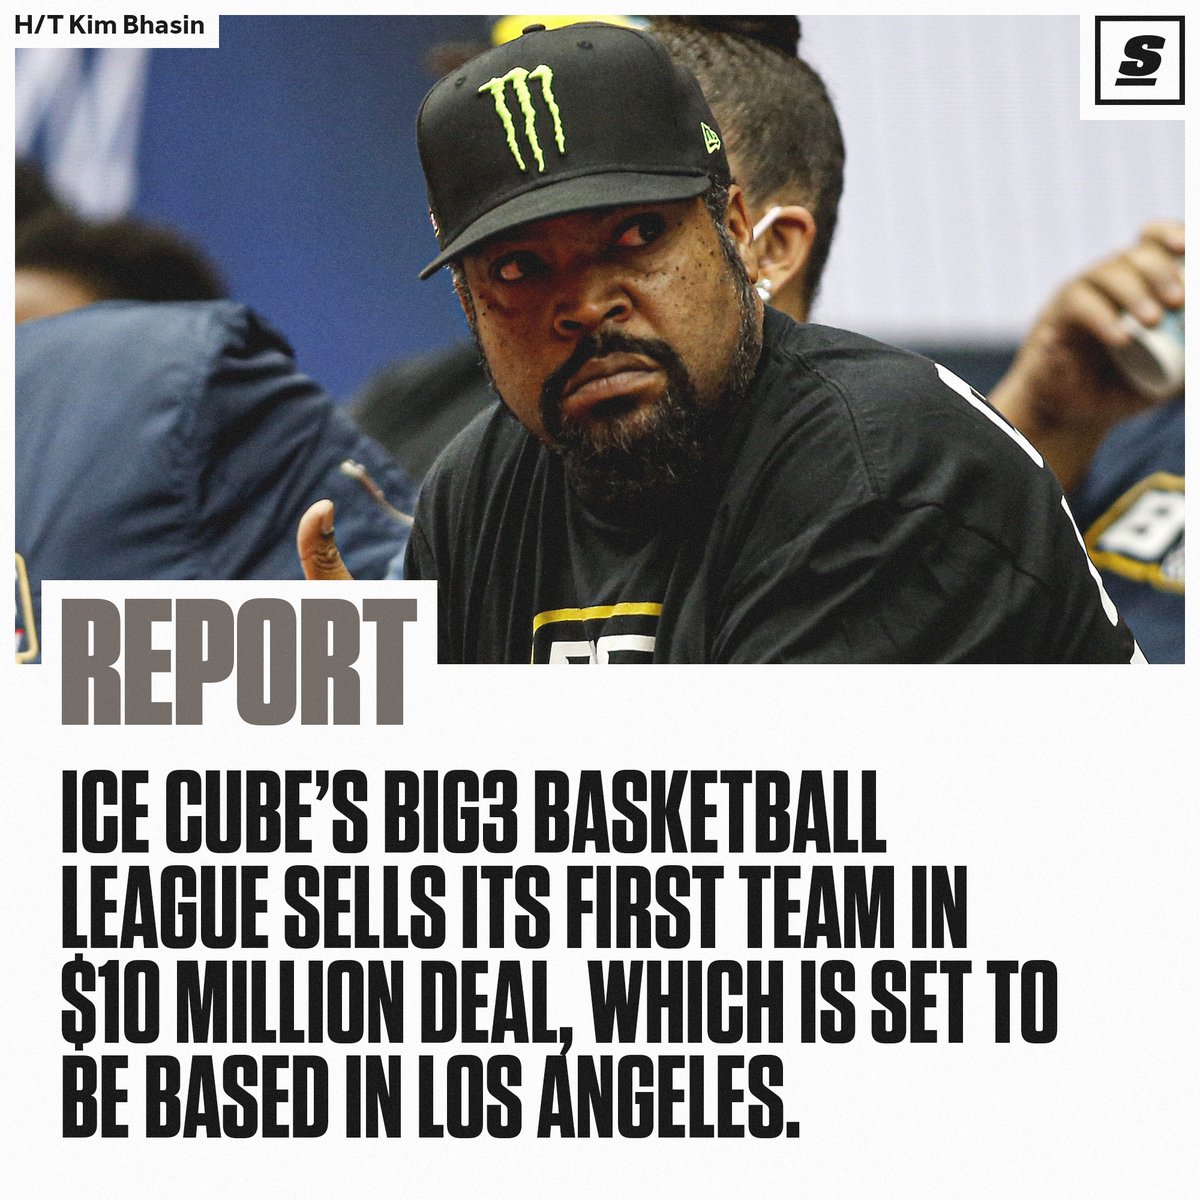 Ice Cube’s Big3 basketball league has reportedly made its first team sale. 💰